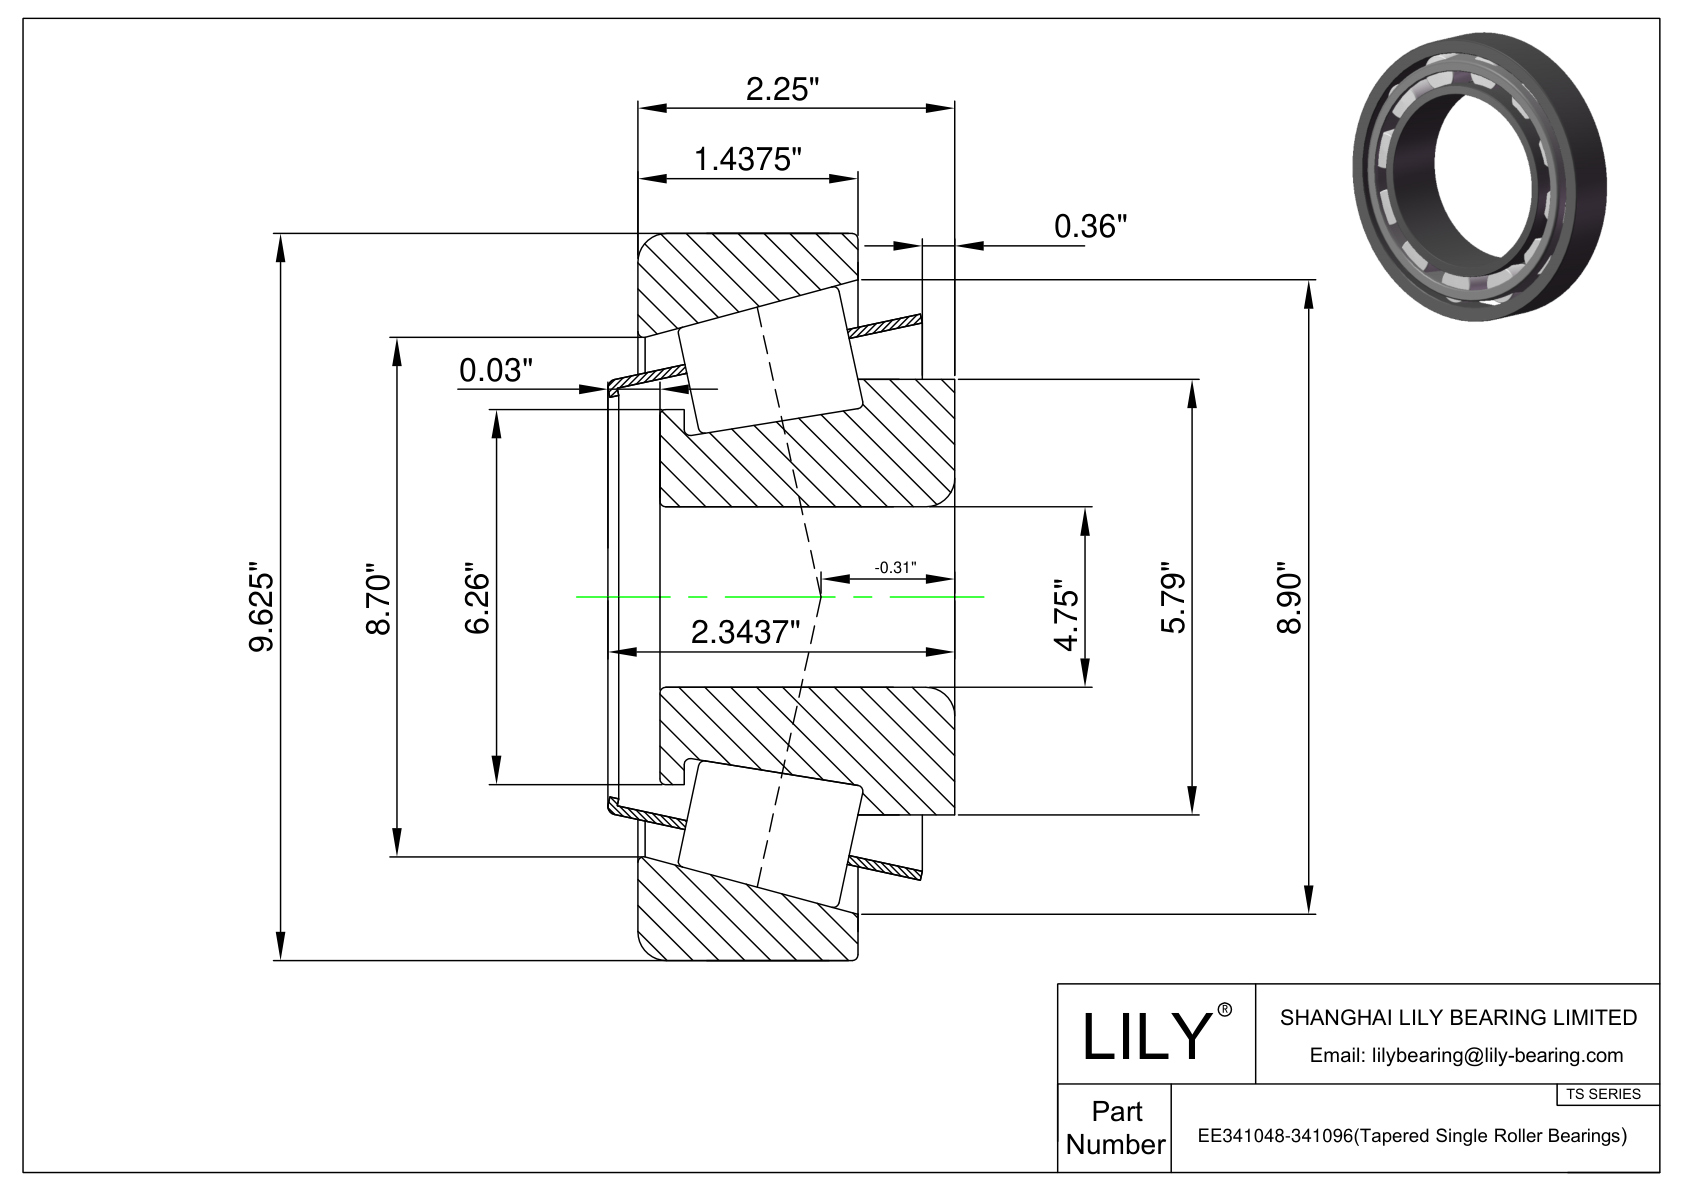 EE341048-341096 TS (Tapered Single Roller Bearings) (Imperial) cad drawing